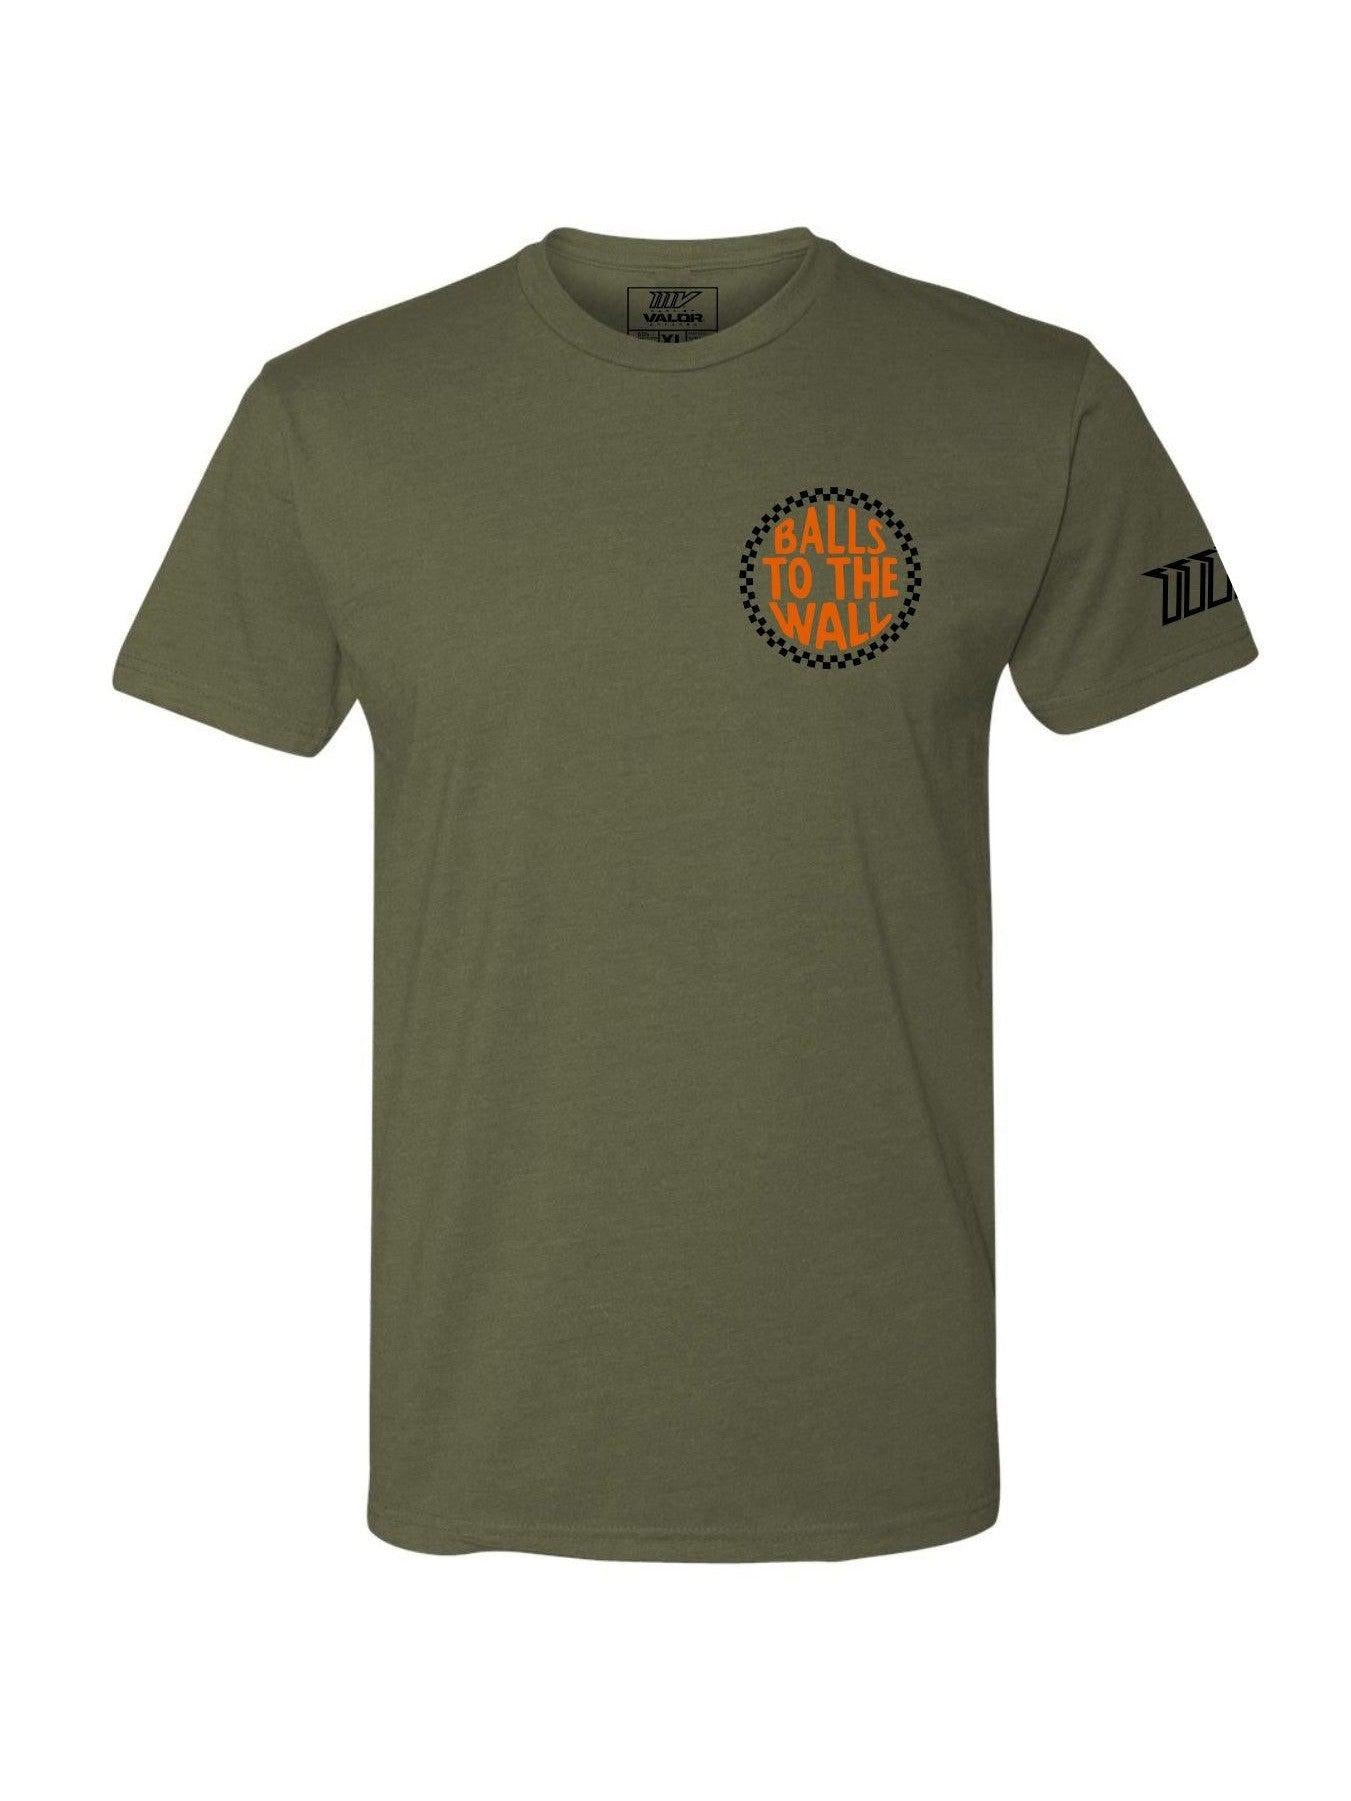 Balls to the Wall 2.0 Military Tee